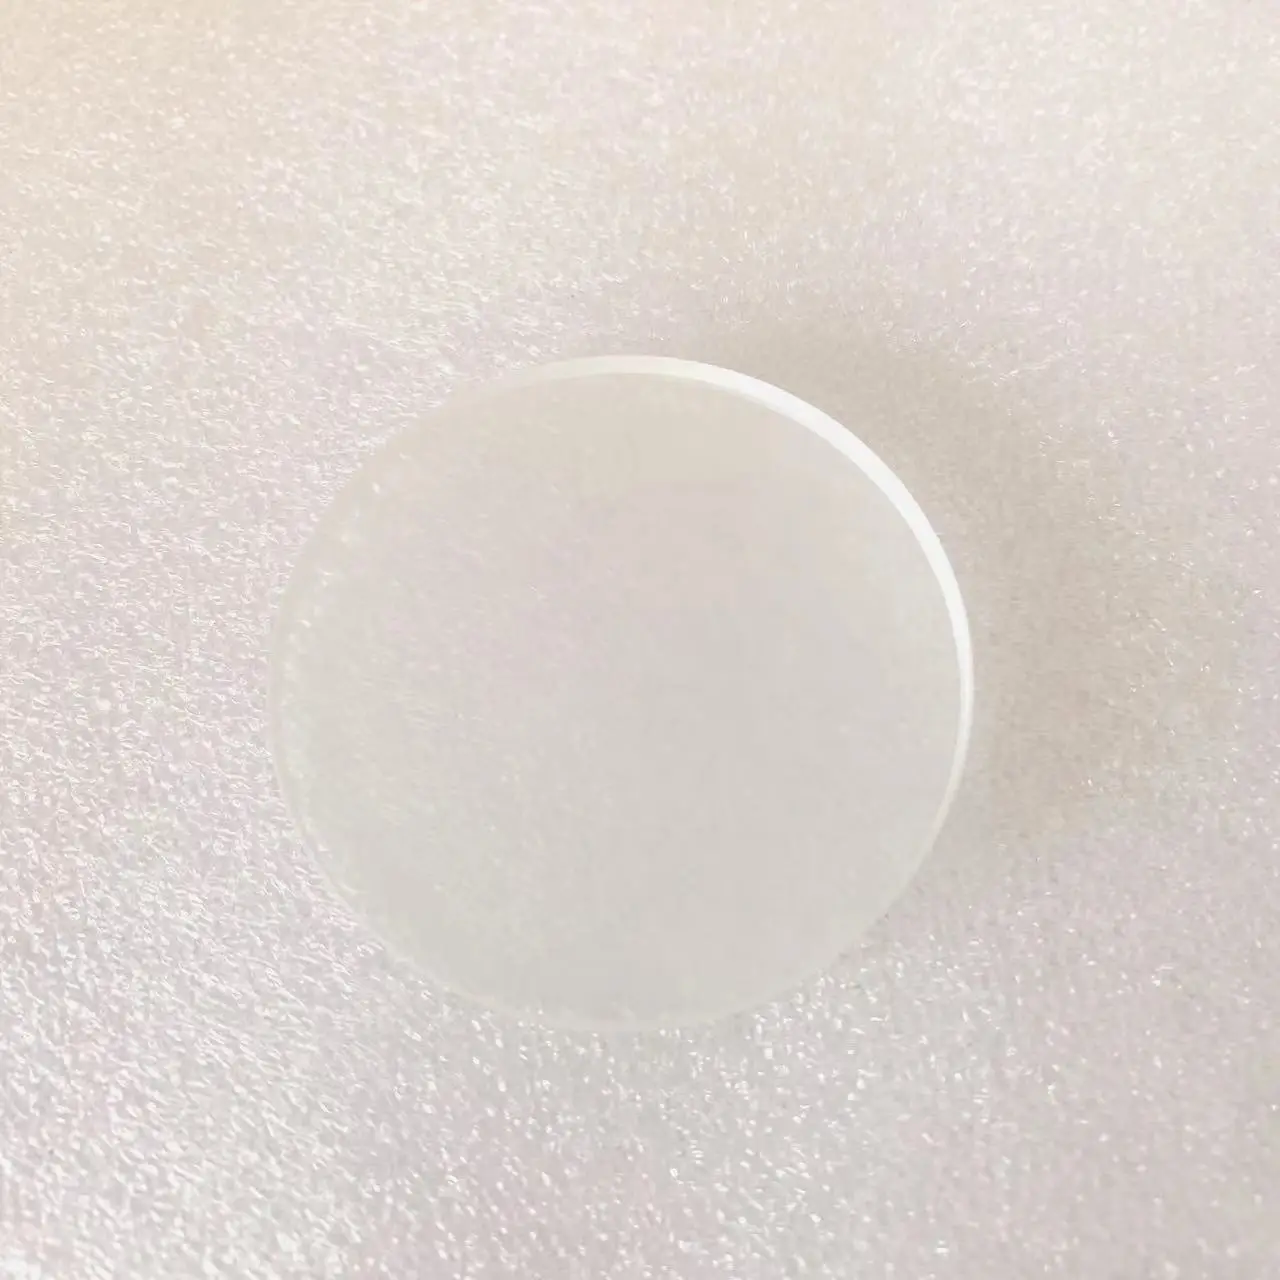 1000Pcs Size Diameter 60mm And 1.3mm Thick One Side Polished Optical BK7 Glass For Antireflective Coating Tests